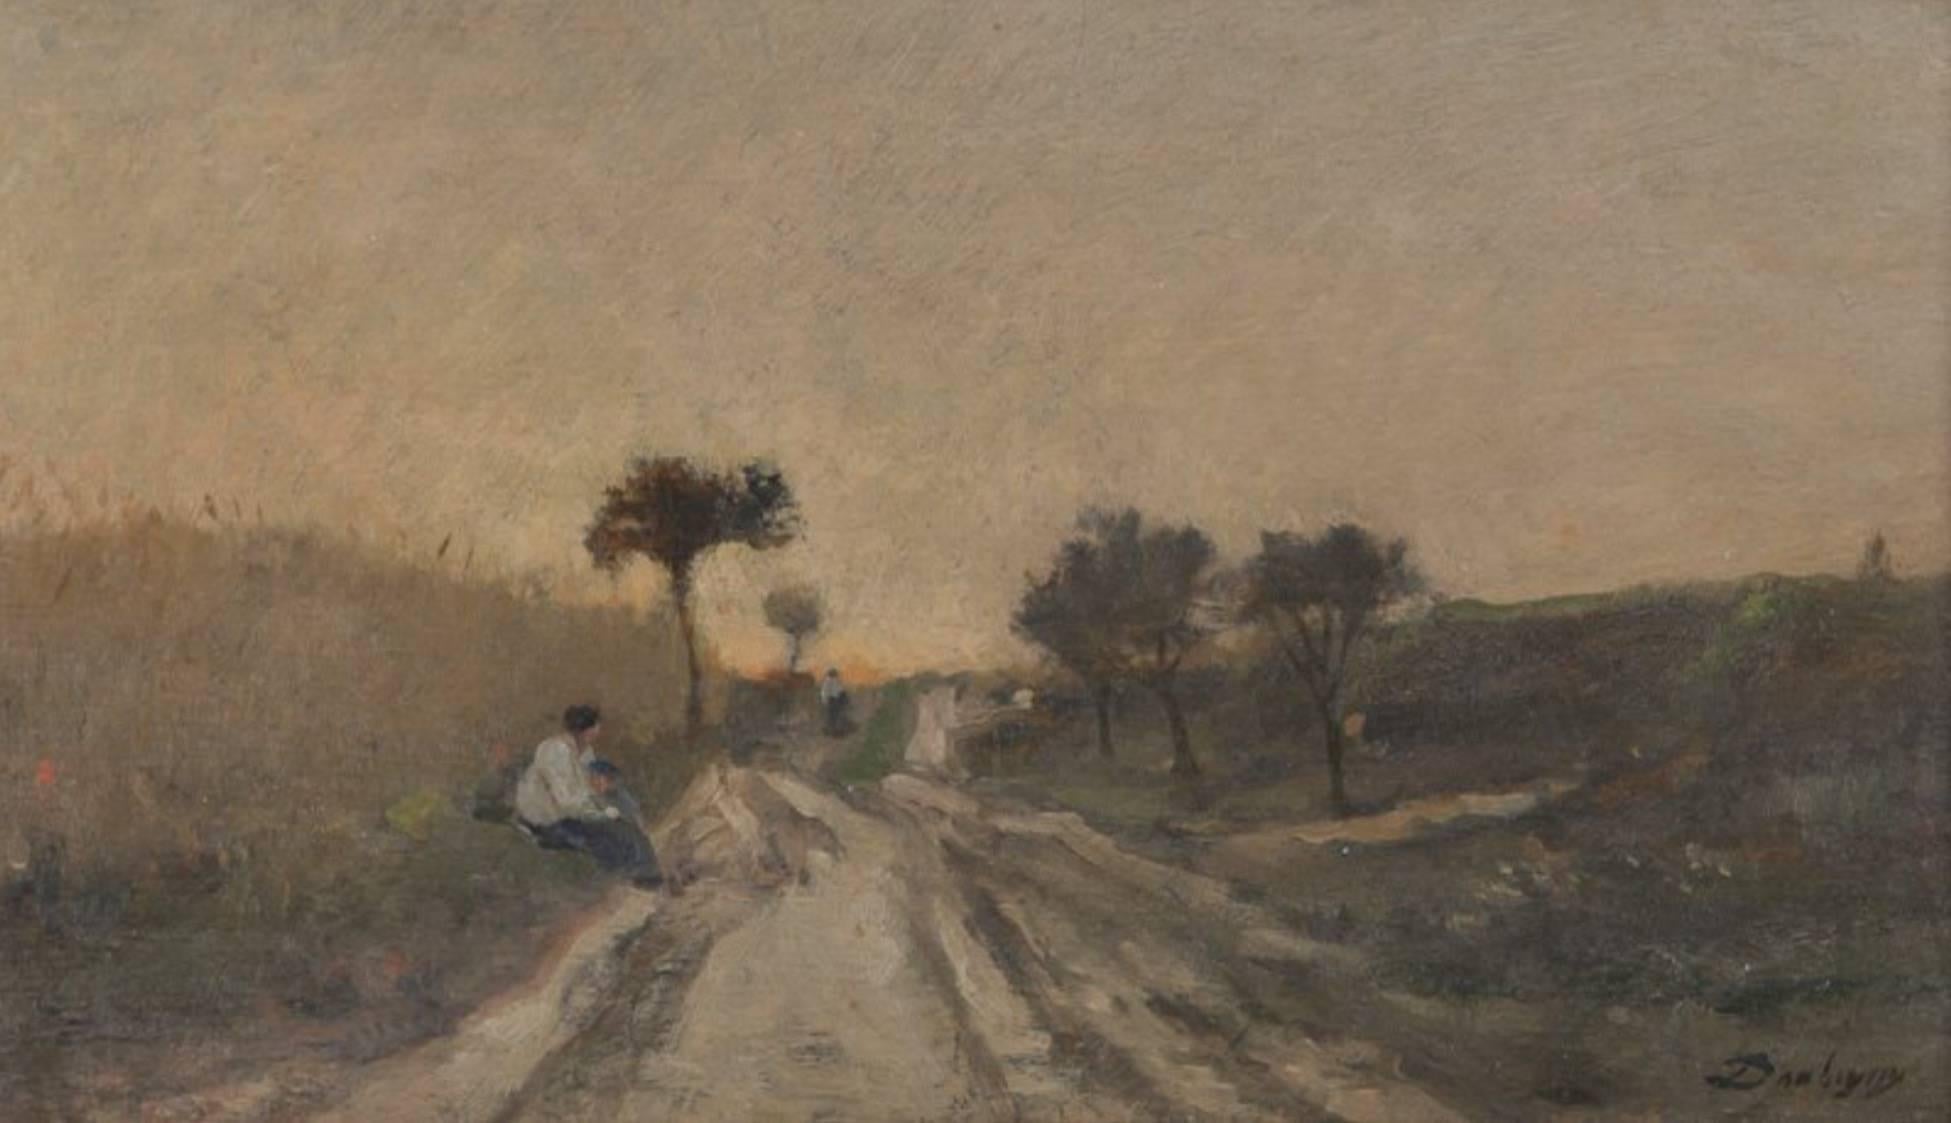 Charles François Daubigny (French, 1817-1878), Untitled (Landscape with figures) oil on board. Signed lower right, Daubigny. Impressionist from the Barbizon School. Colleague of Pissarro, Pelouse and Théophile de Bock. 

Provenance: Acquired from